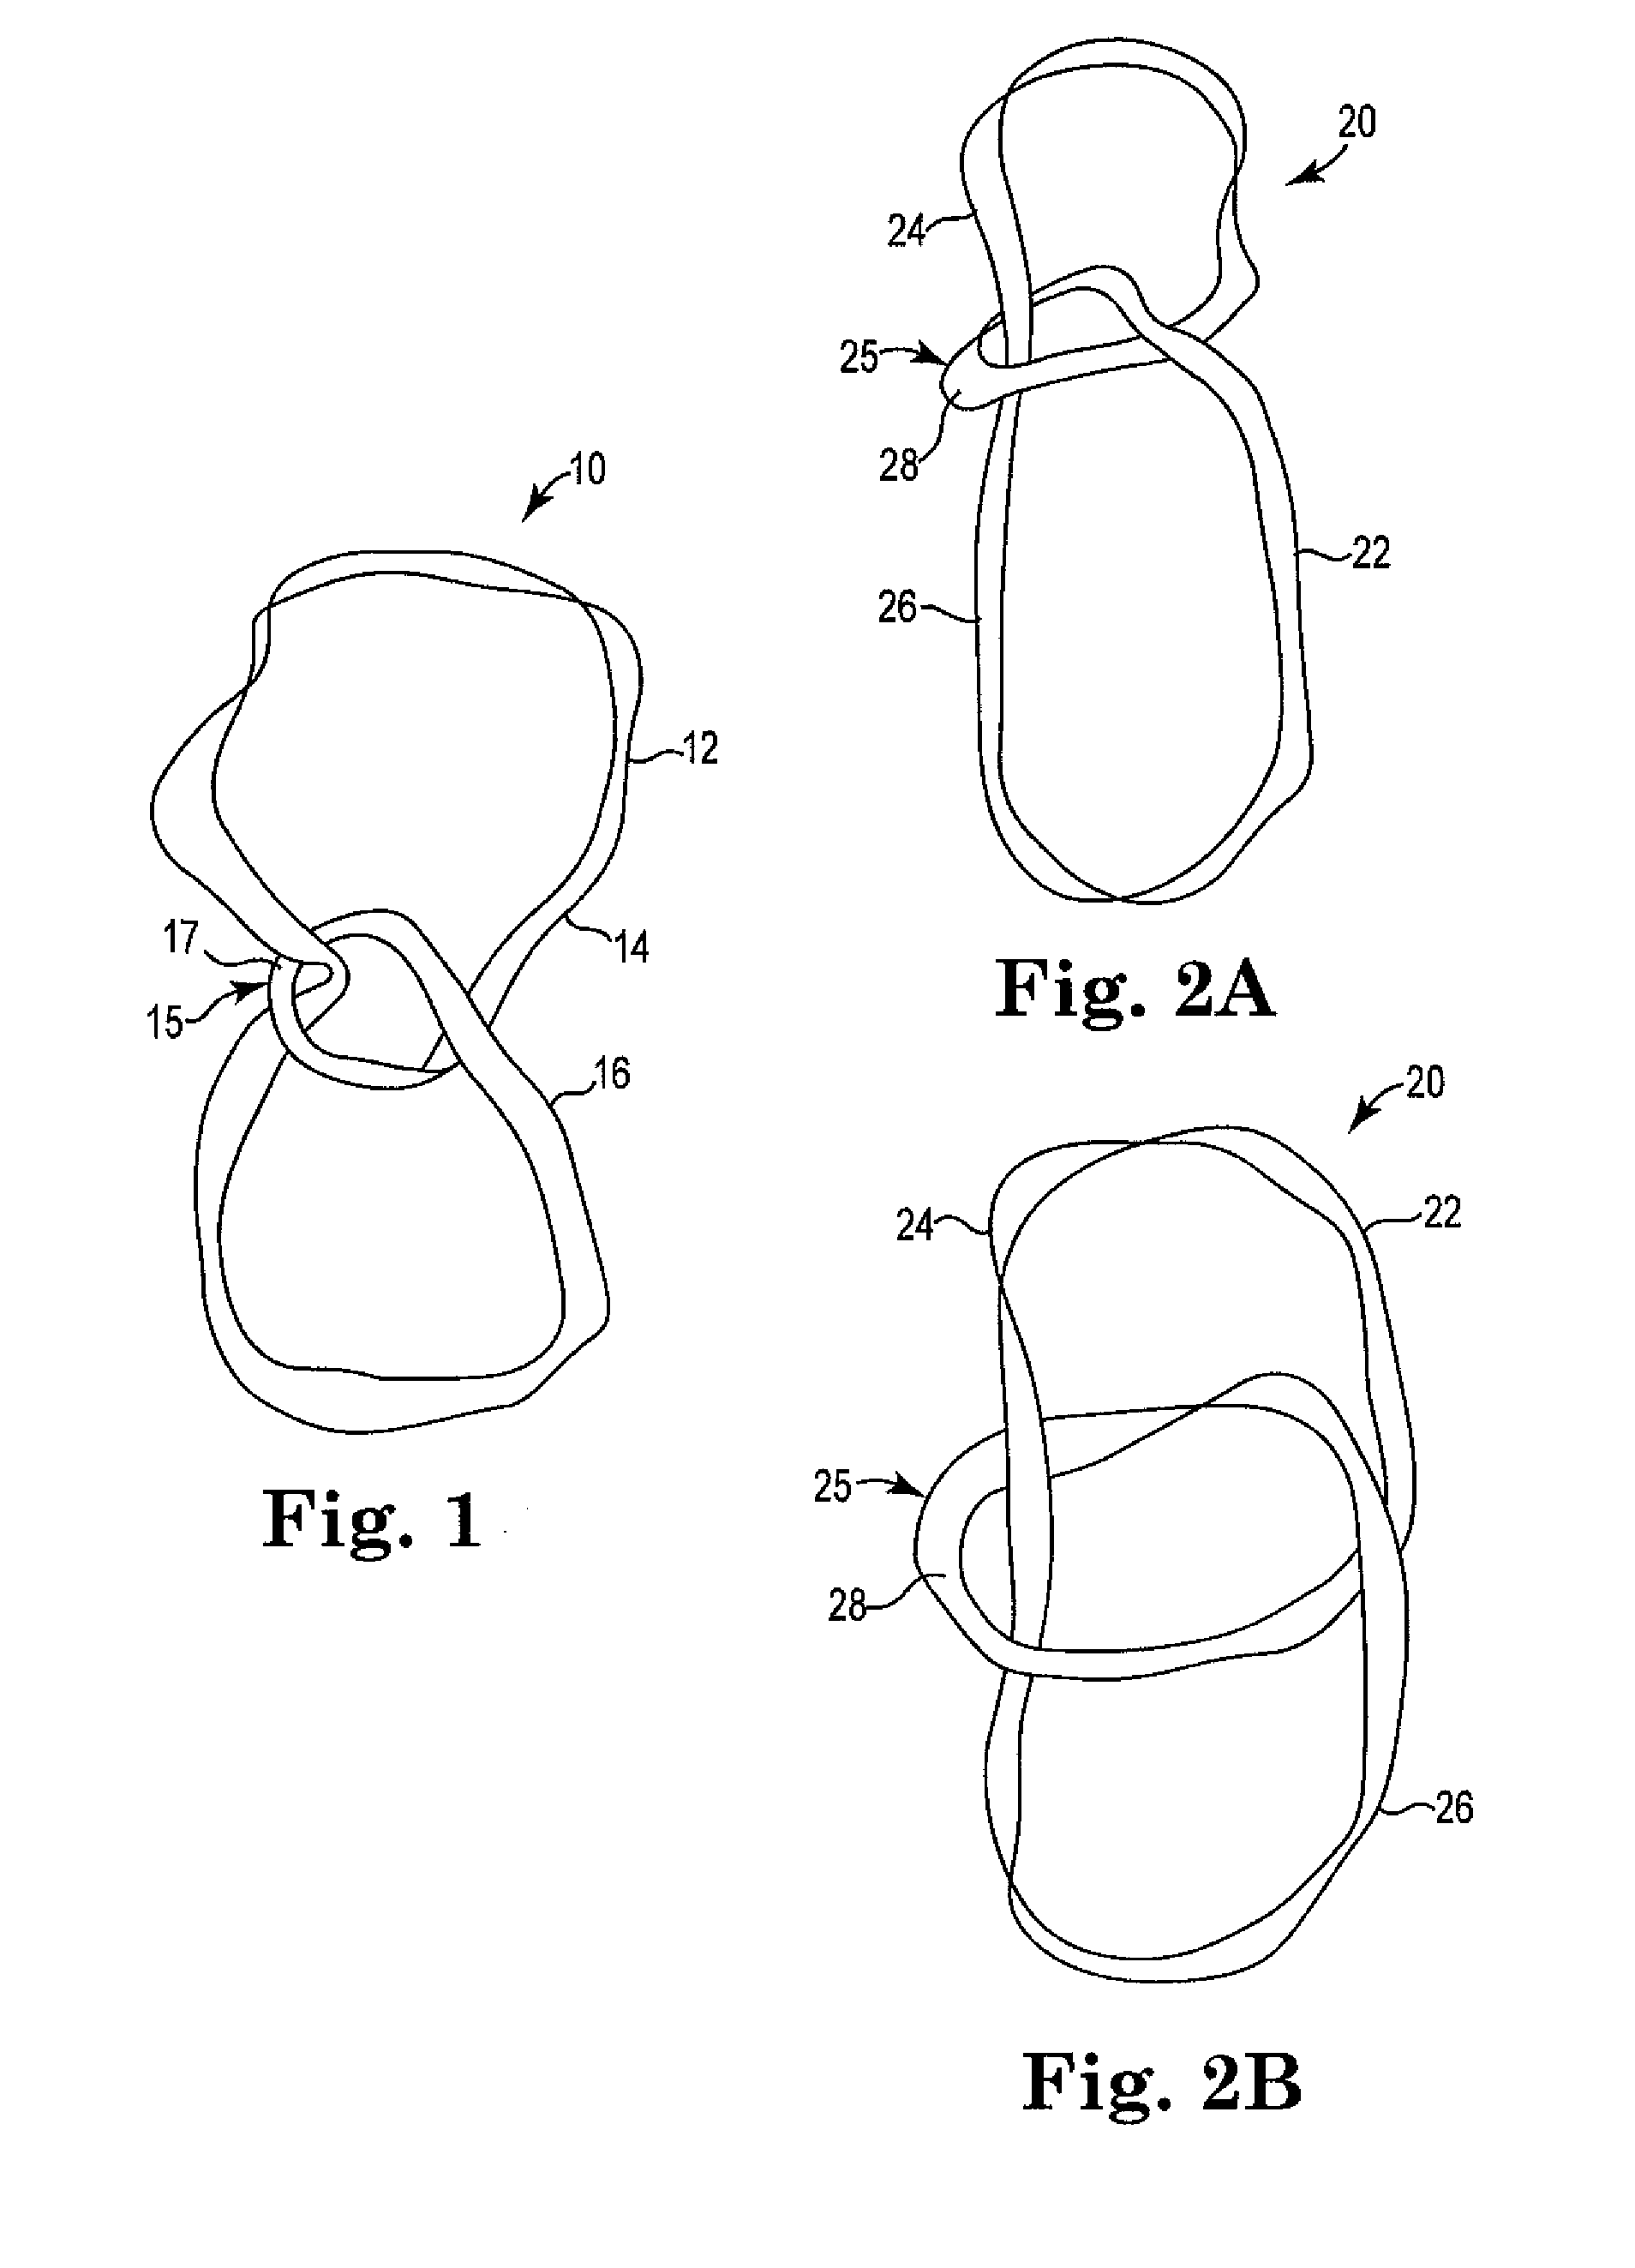 Closed loop device incorporating one or more indecomposable knots and methods of using